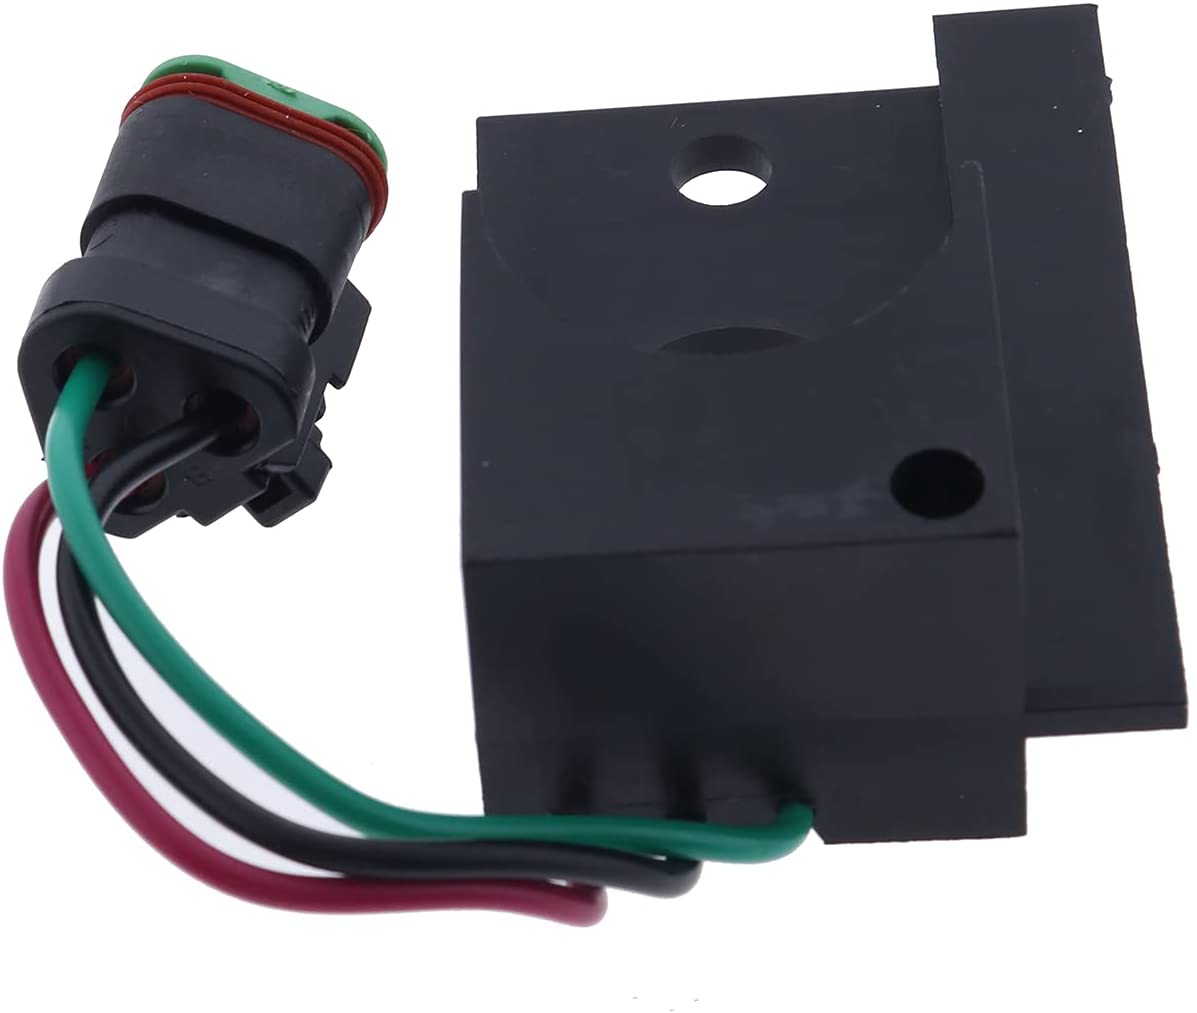 Seat Bar Sensor Switch 7105252 Compatible with Bobcat Skid Steer S70 450 453 463 553 653 751 753 763 773 853 863 864 873 953 963 F&C Series - KUDUPARTS